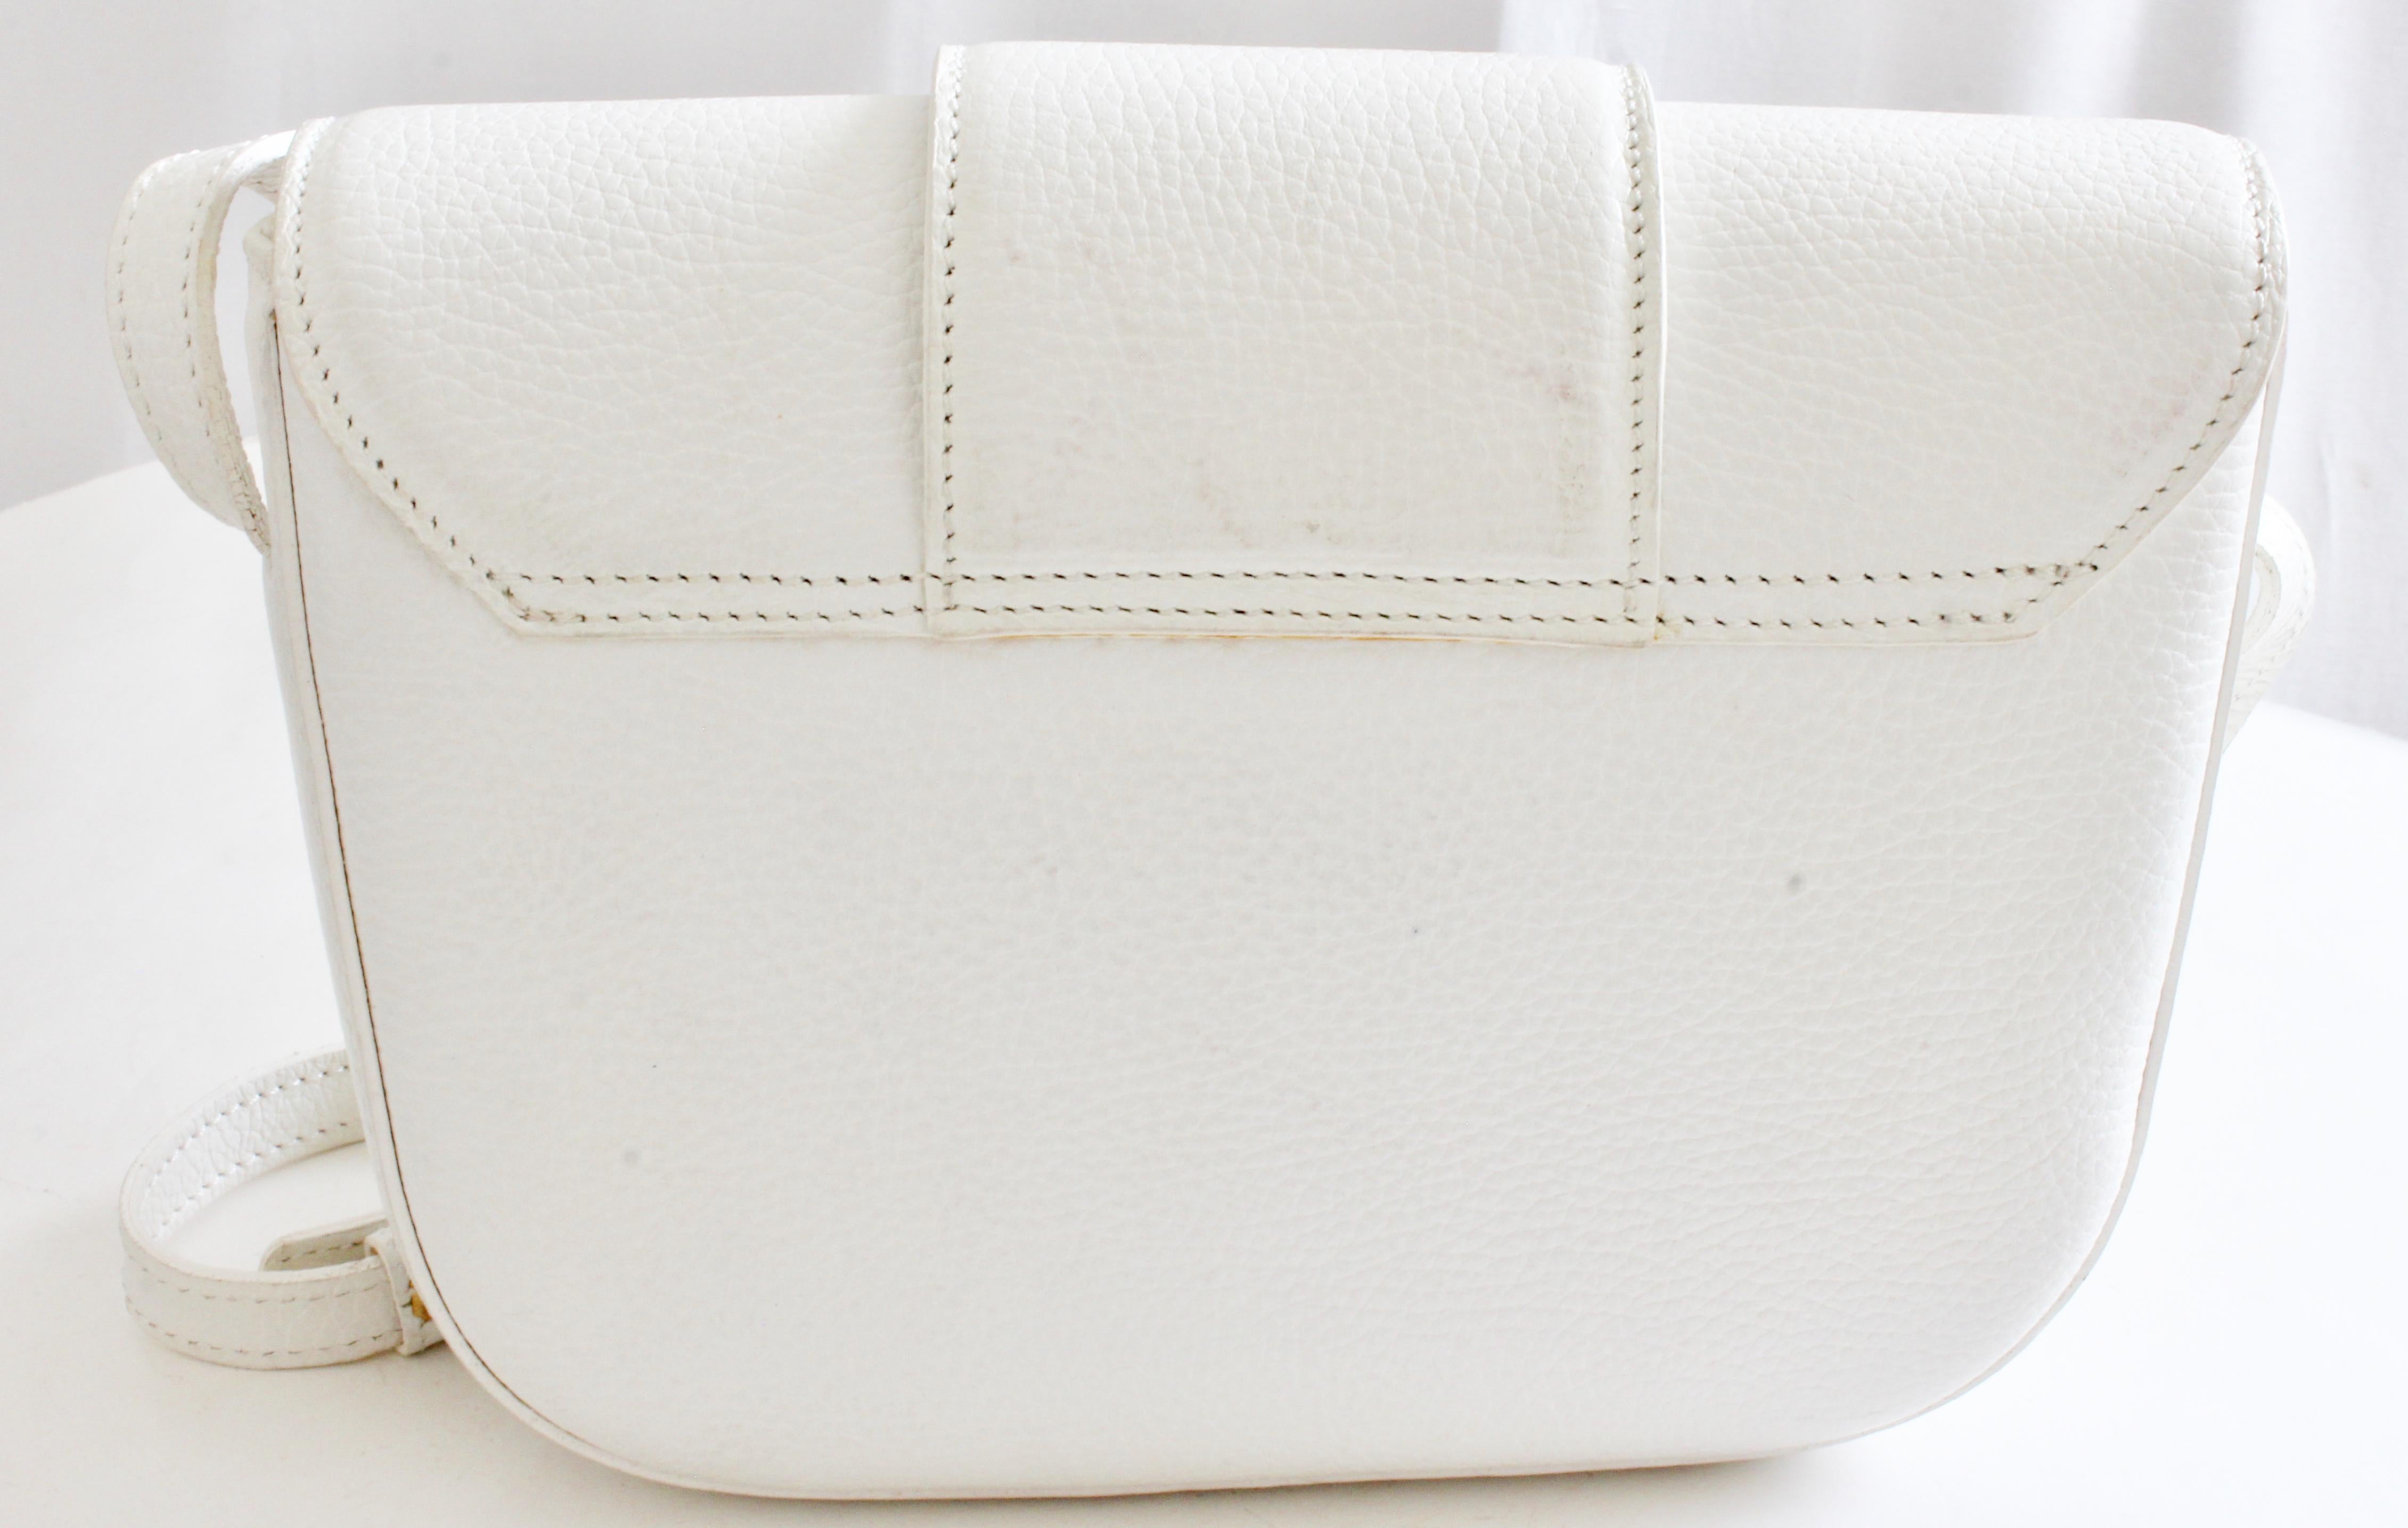 Bally Crossbody Bag White Pebbled Leather Top Flap Shoulder Bag Italy Vintage For Sale 6